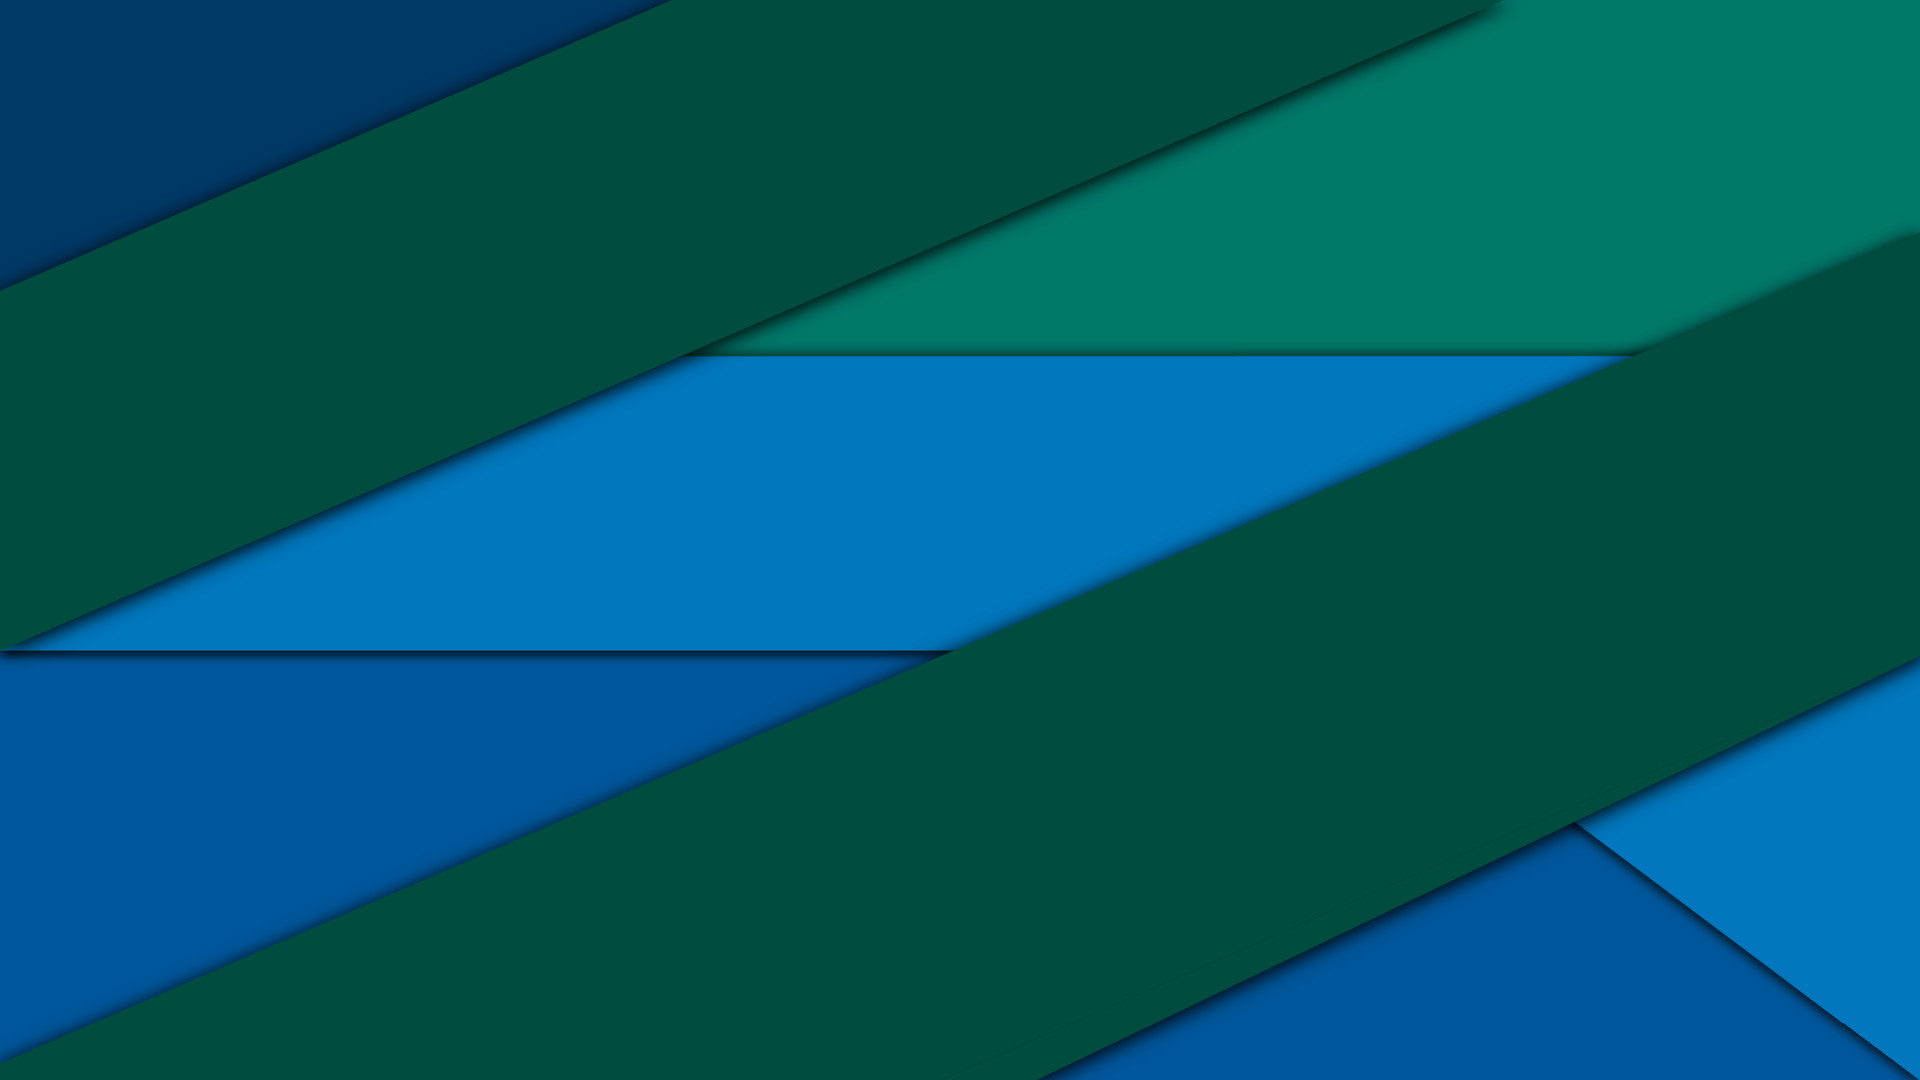 1920x1080 10. Blue and Green Material Design Wallpaper